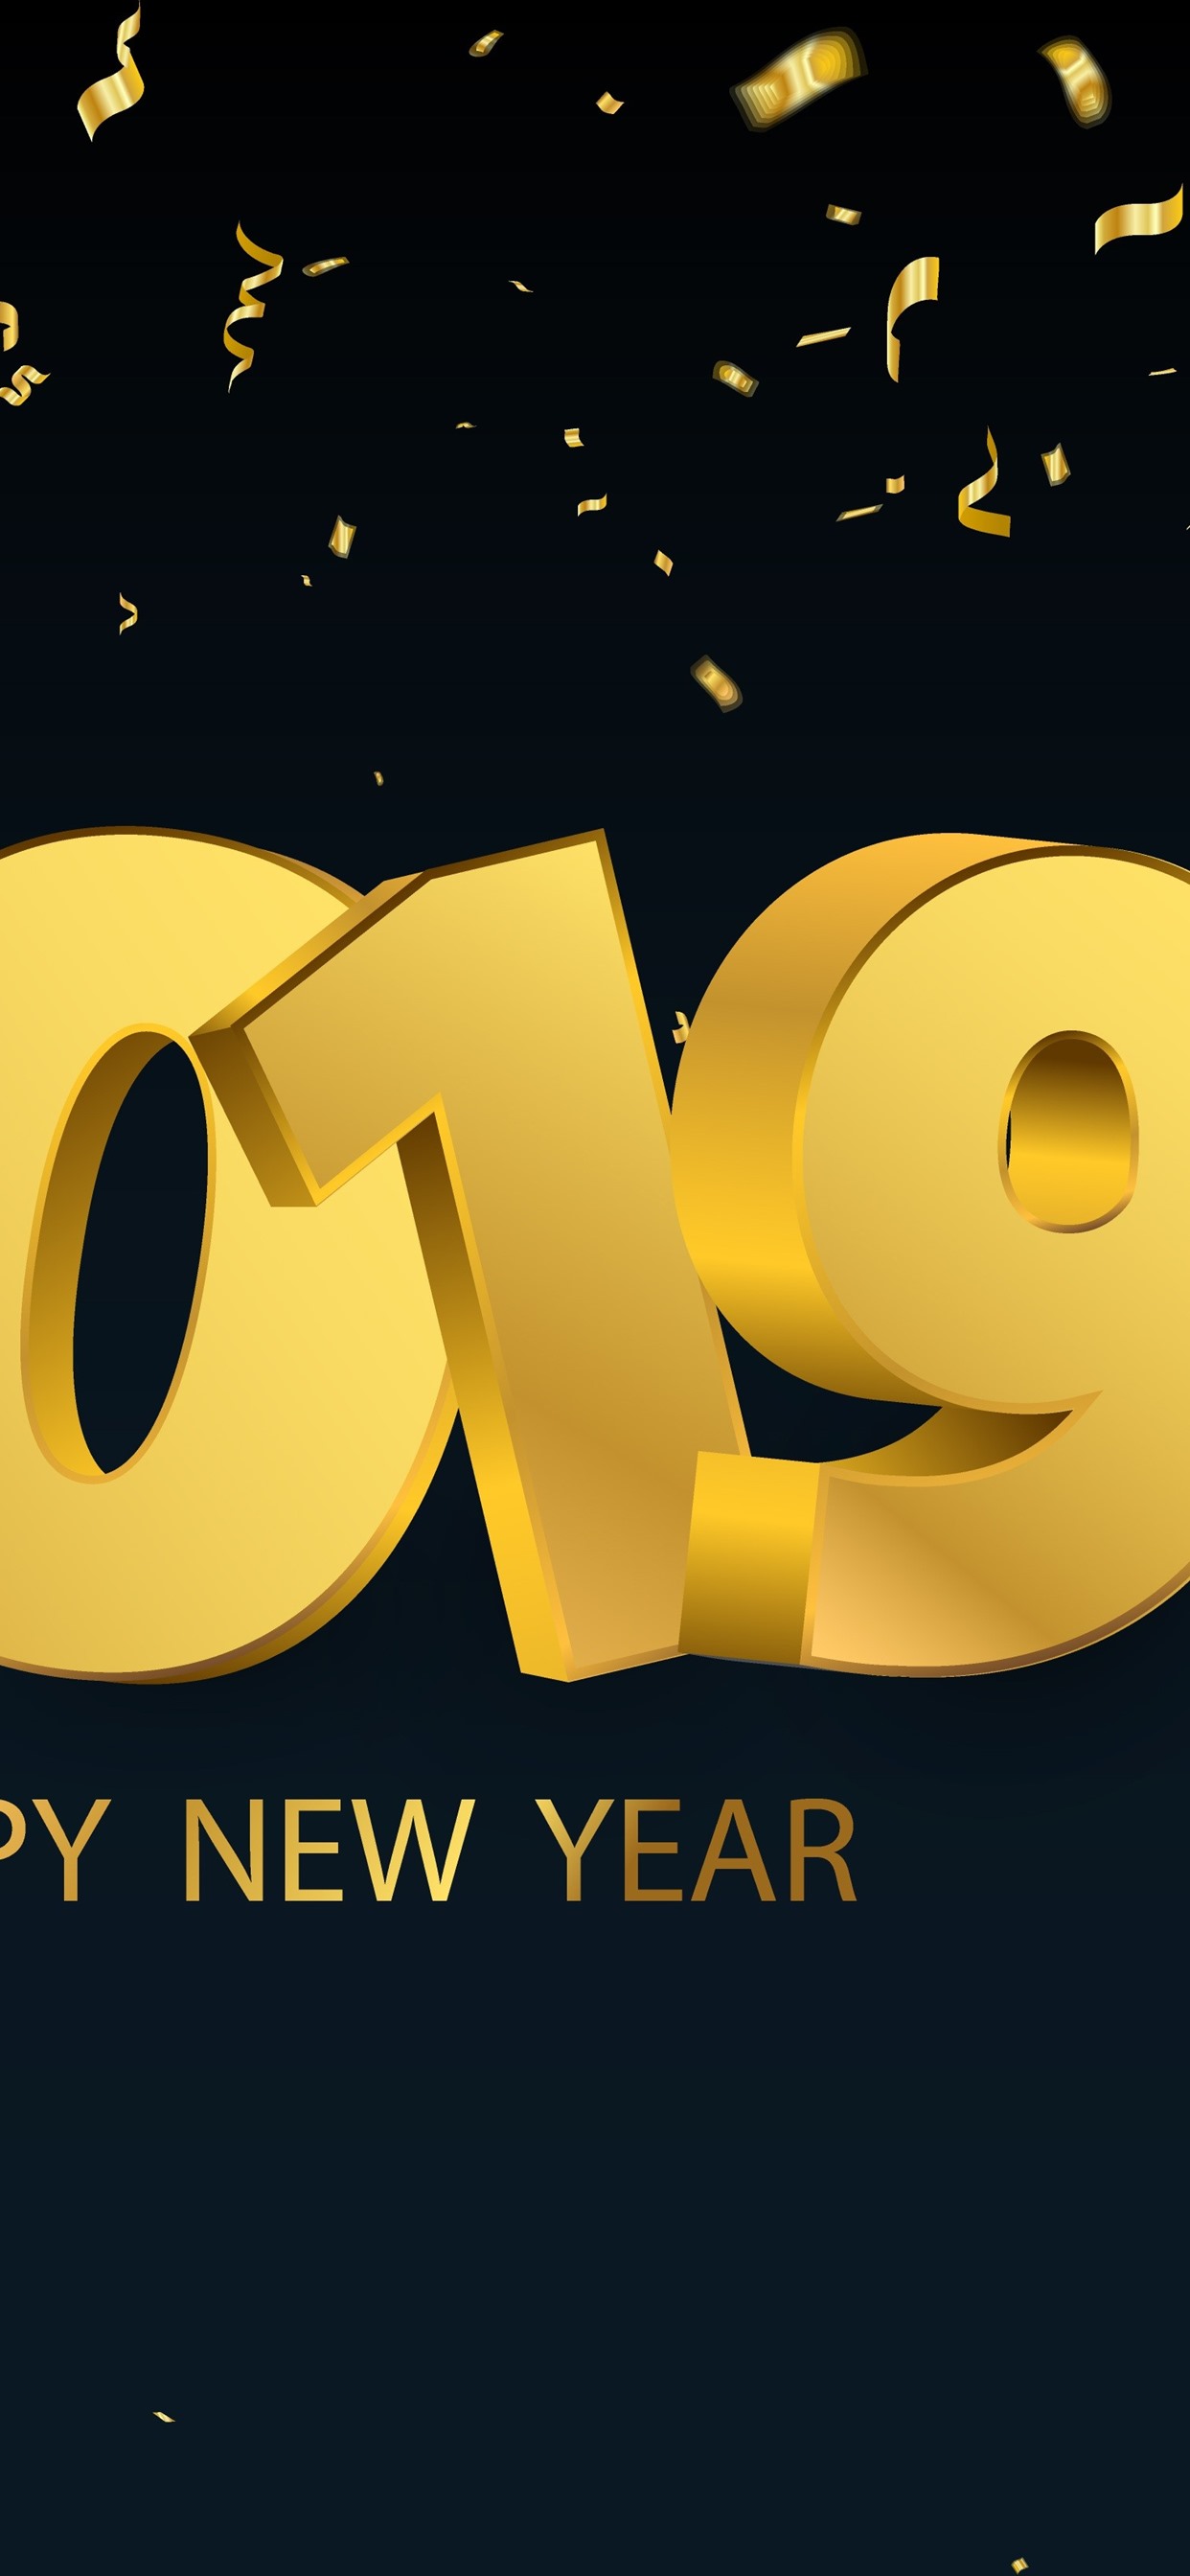 Iphone Wallpaper Happy New Year 2019, Golden Style - 2019 Happy New Year - HD Wallpaper 